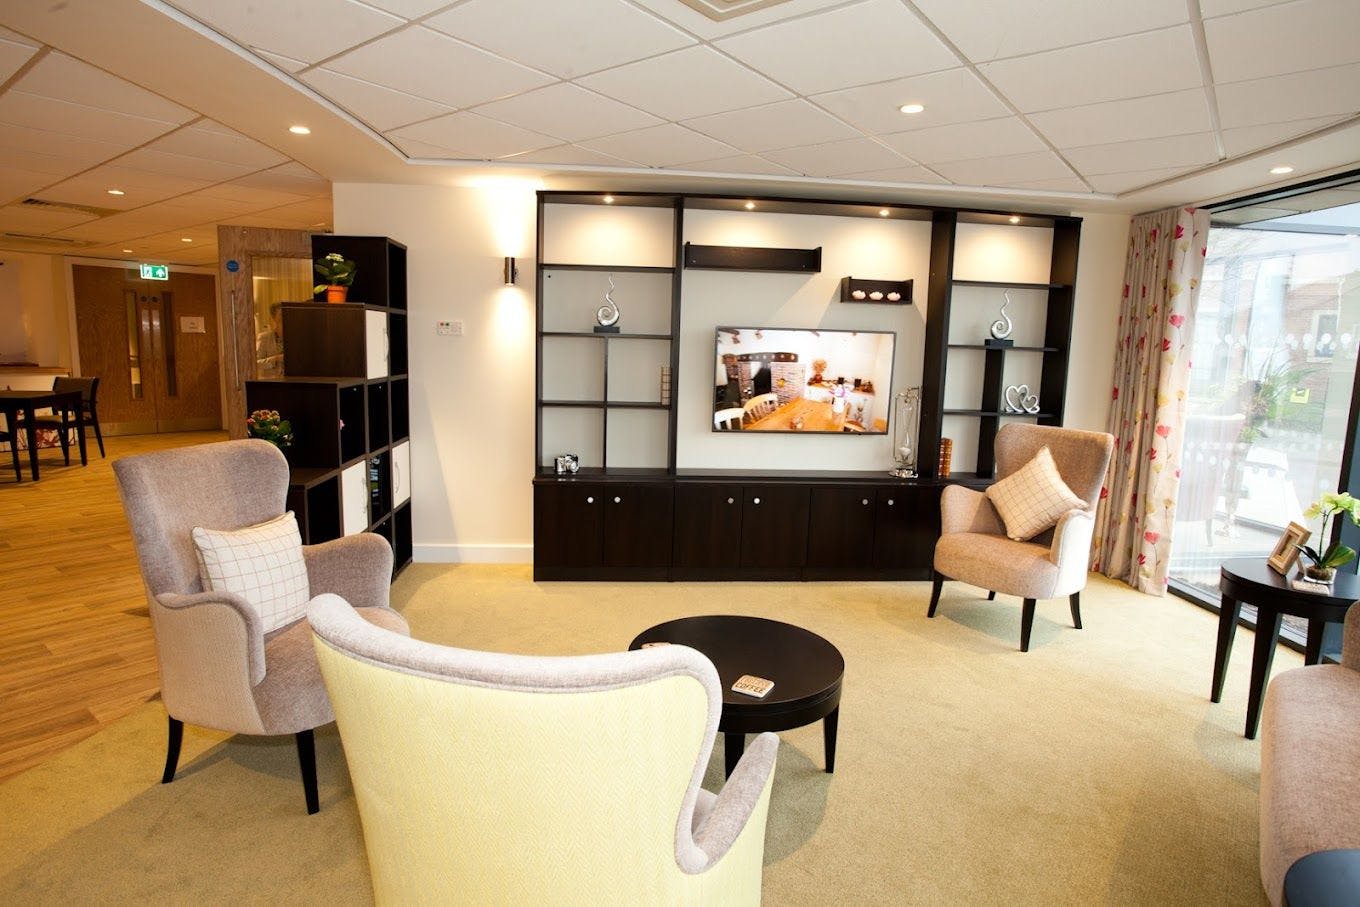 Lounge of Seacroft Green care home in Leeds, Yorkshire